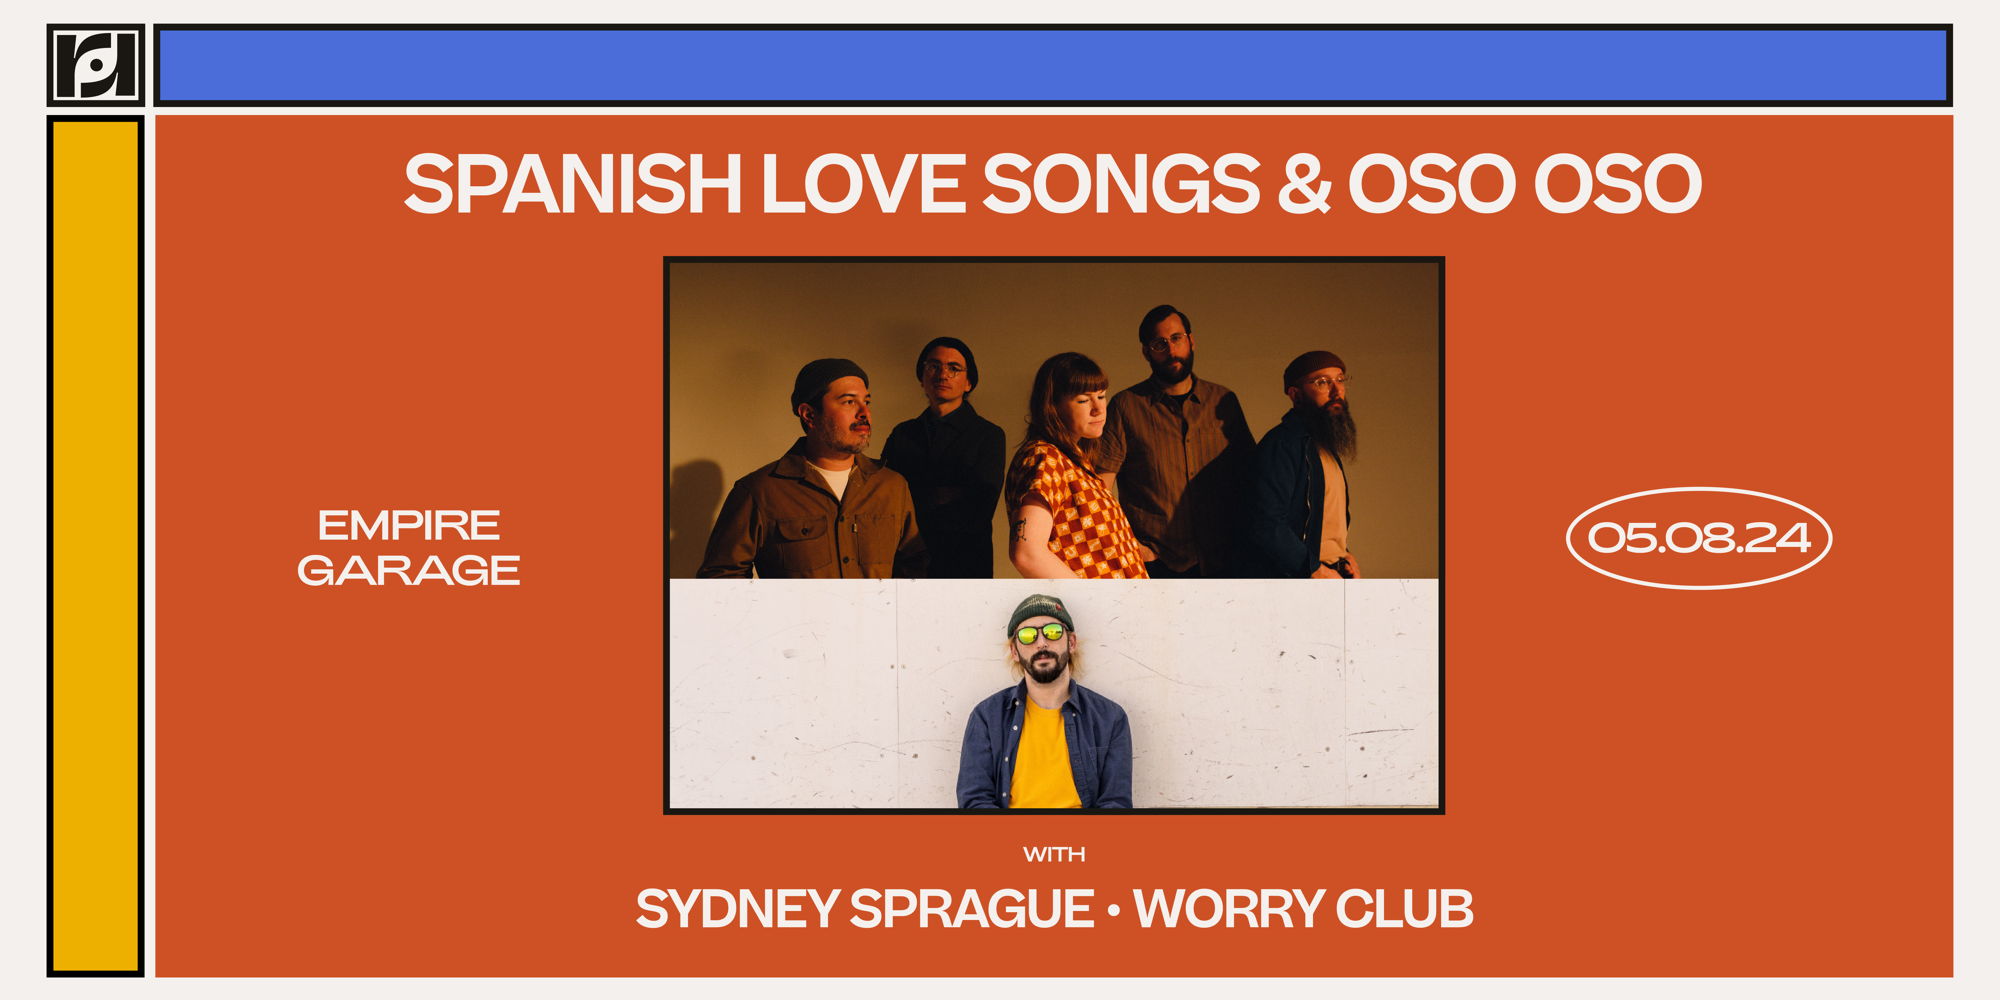 Resound Presents: Spanish Love Songs & Oso Oso w/ Sydney Sprague and Worry Club at Empire Garage promotional image